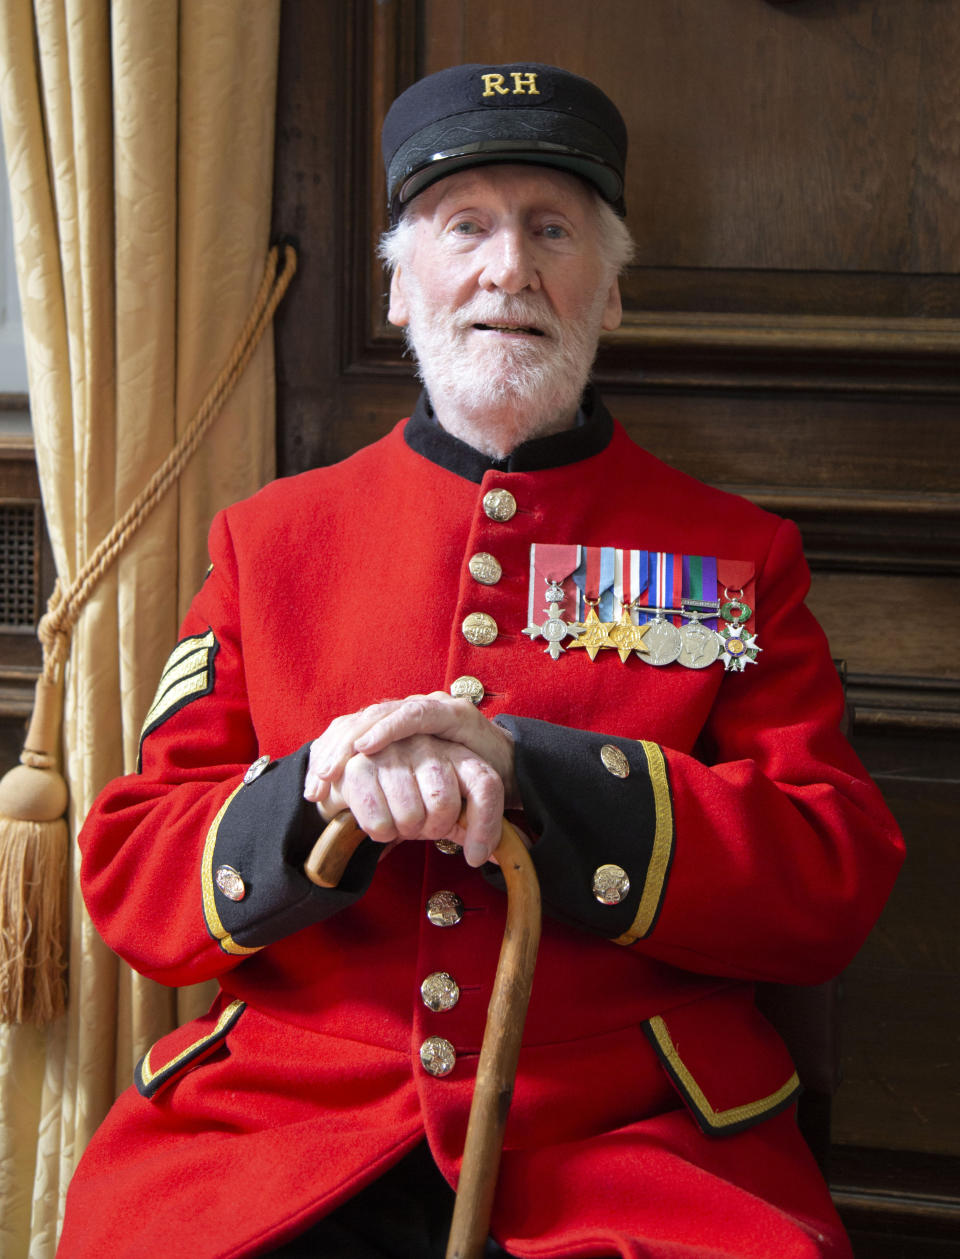 In this image taken on April 29, 2020 World War II veteran Bob Sullivan poses for a photo at the Royal Hospital Chelsea in London. Forgive British World War II veteran Bob Sullivan for being unfussed about VE-Day. After all, on May 8, 1945, he was lying in Cossham Hospital, having been wounded in the closing days of the fight to defeat the Nazis. As he couldn't move because of a plaster cast on his leg, he wasn't even able to attend a celebratory supper.(Liam Best via AP)